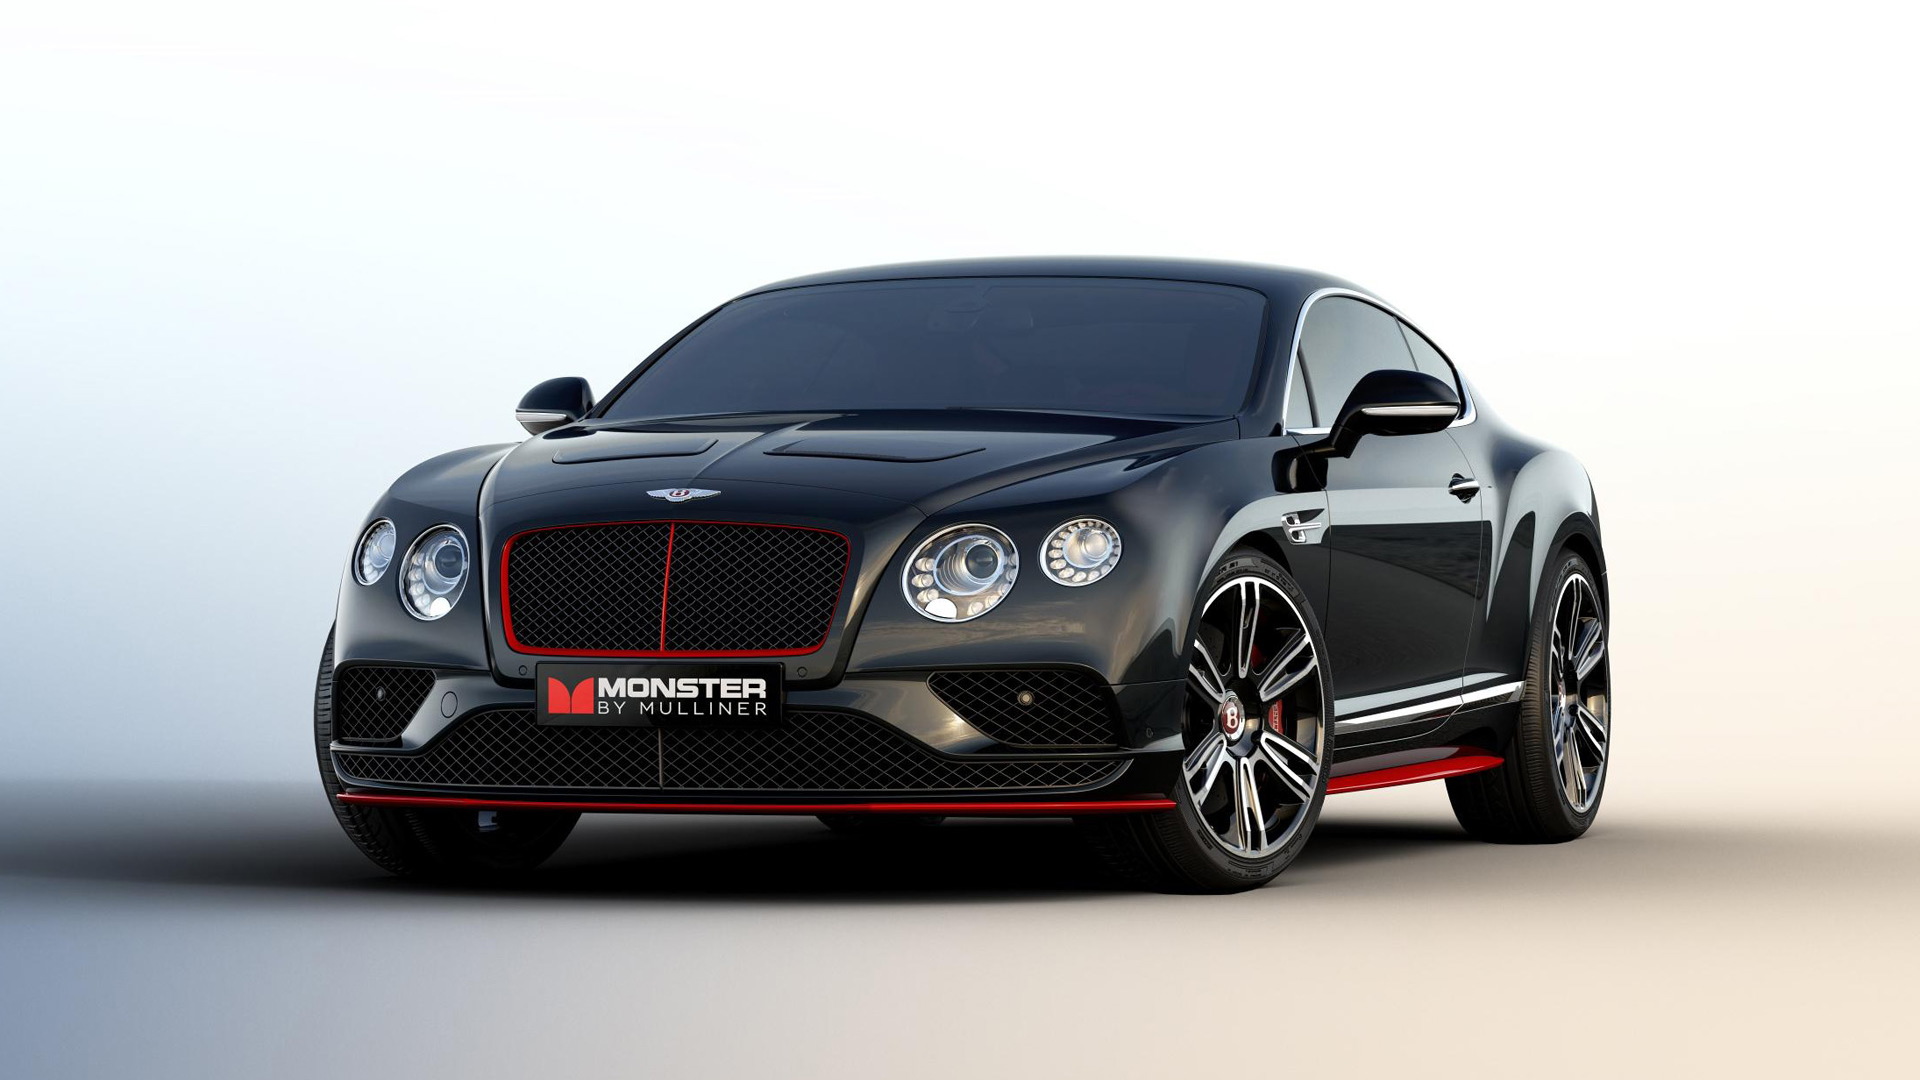 Bentley Continental GT V8 S with Monster audio - 2016 Consumer Electronics Show